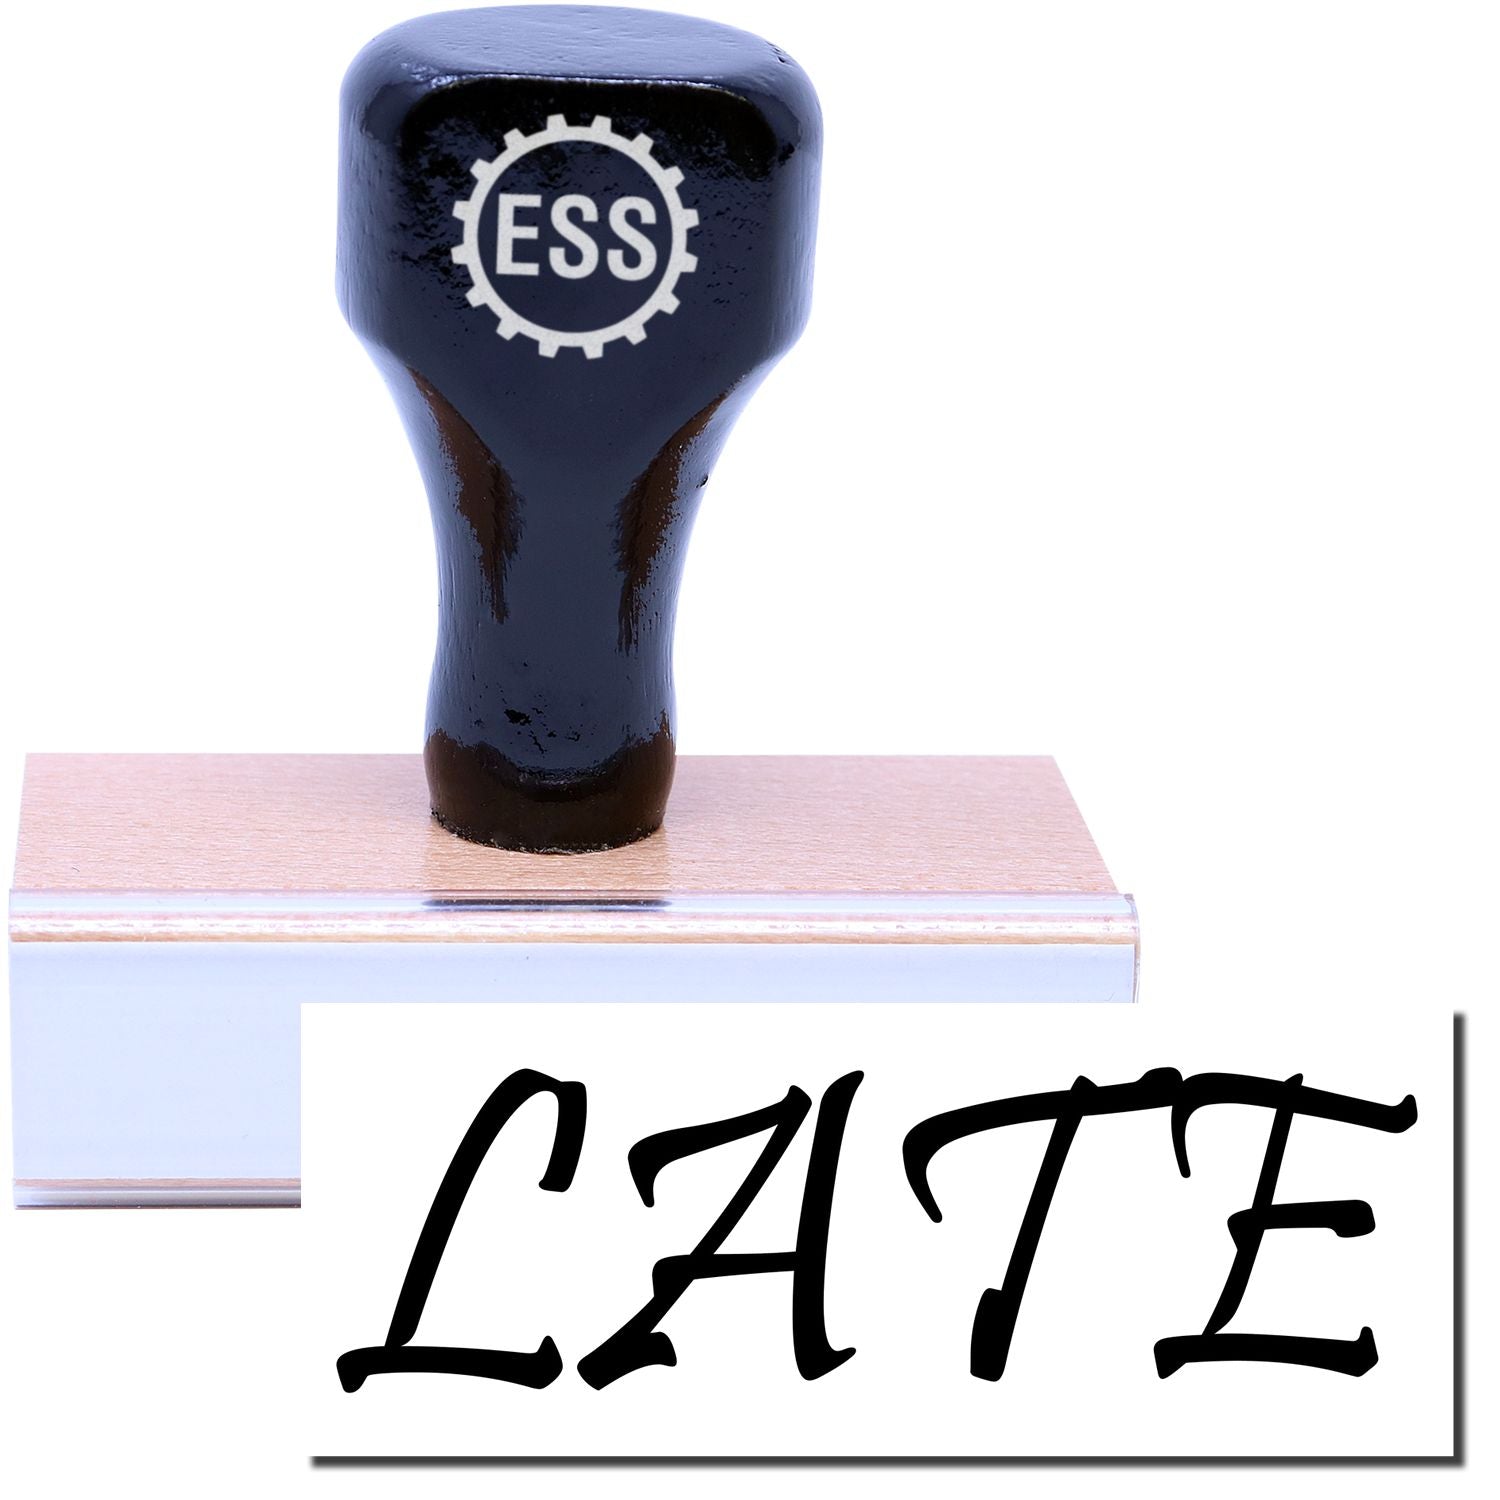 A stock office rubber stamp with a stamped image showing how the text "LATE" is displayed after stamping.